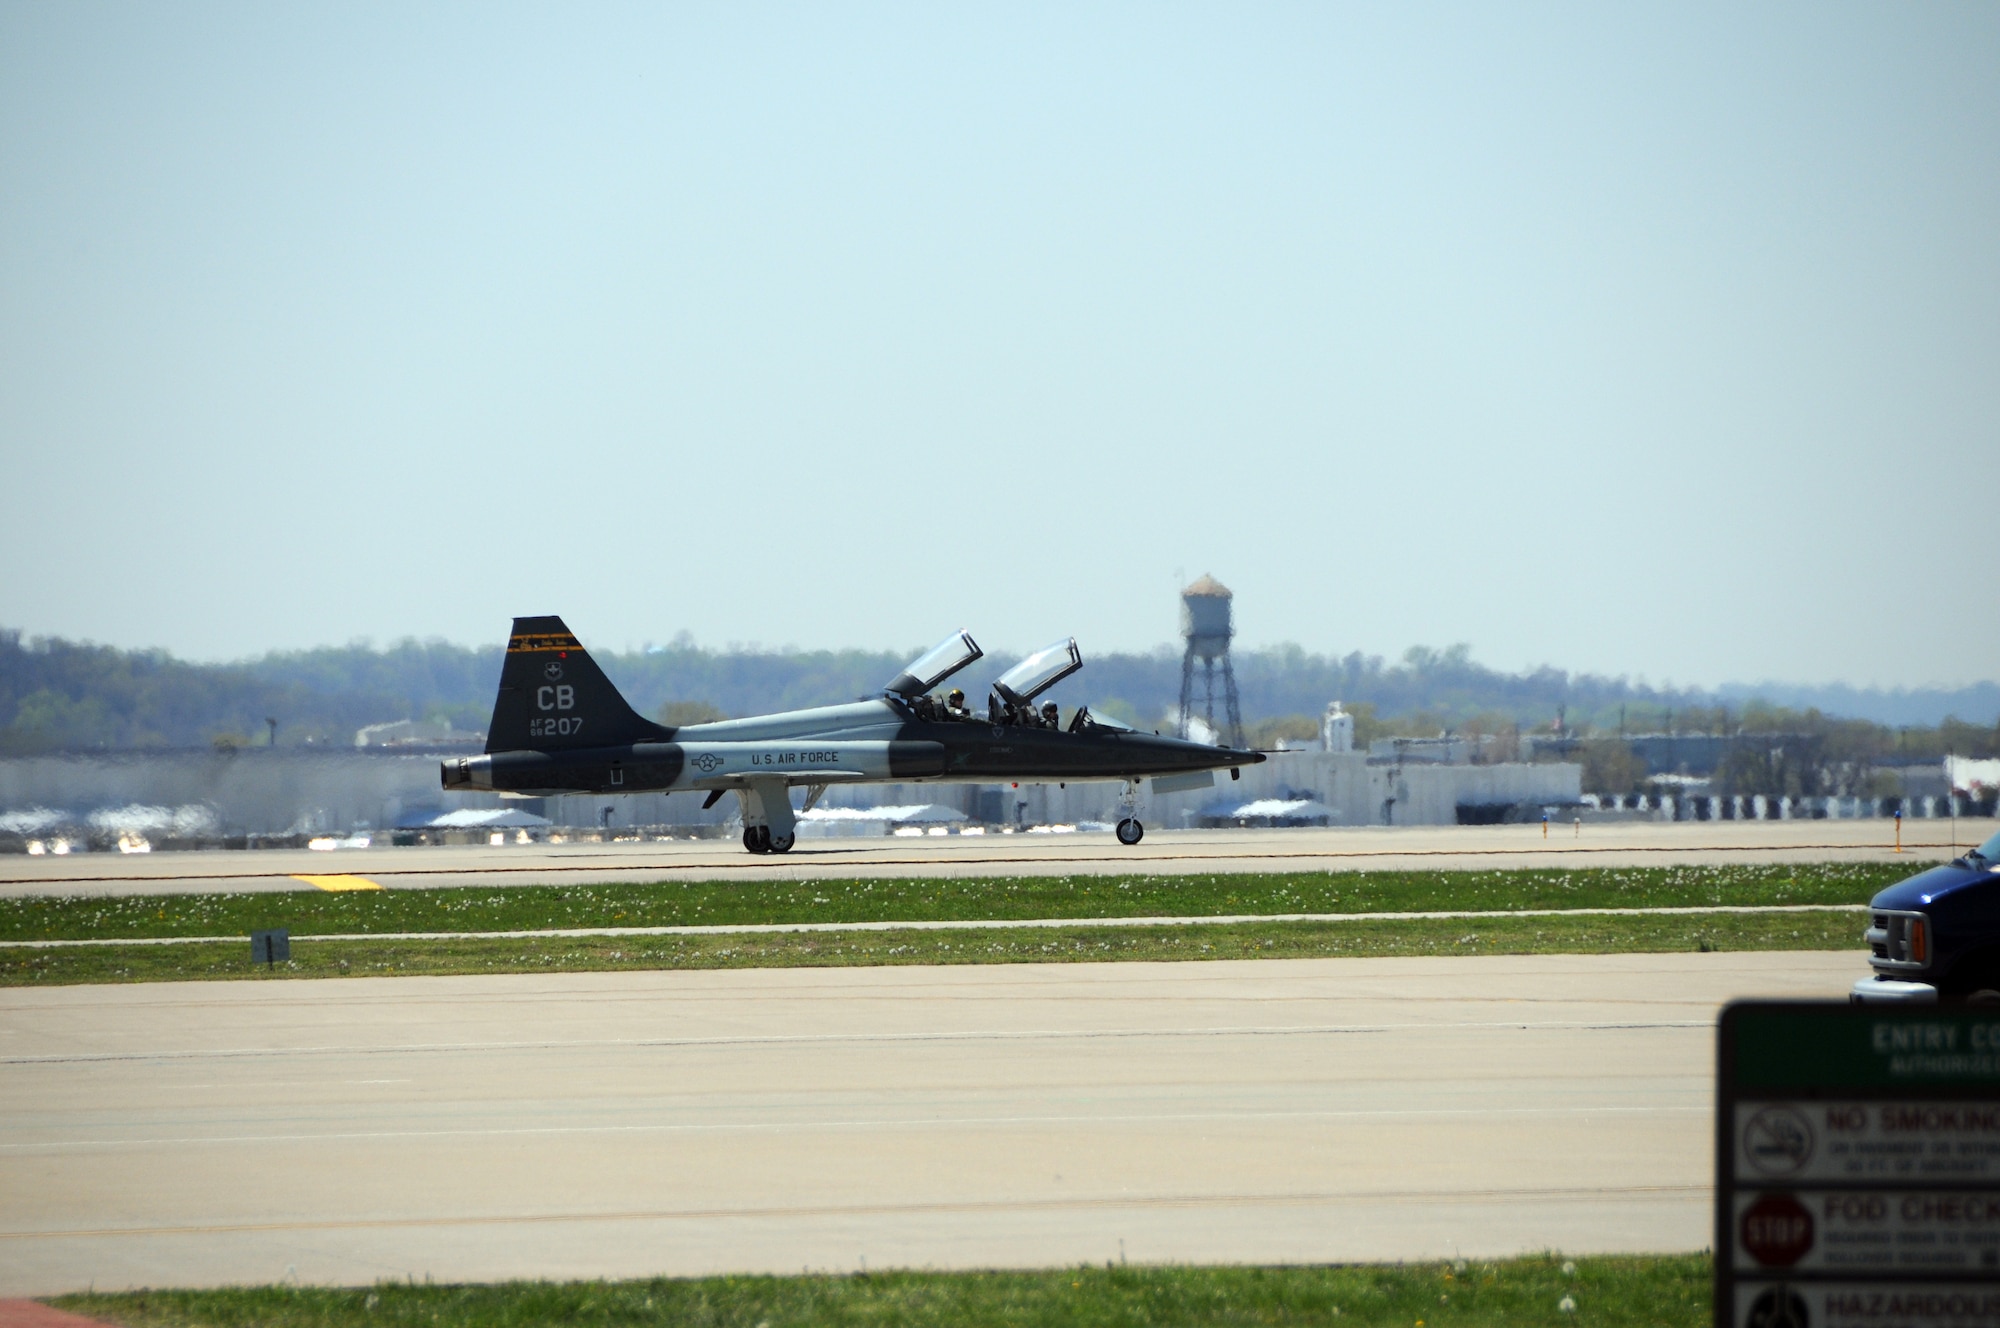 An T-38 Talon taxis on the tarmac after it arrived at the Kentucky Air National Guard on April 18 for the Thunder Over Louisville air show.  (USAF photo by Tech. Sgt. Phil Speck.)